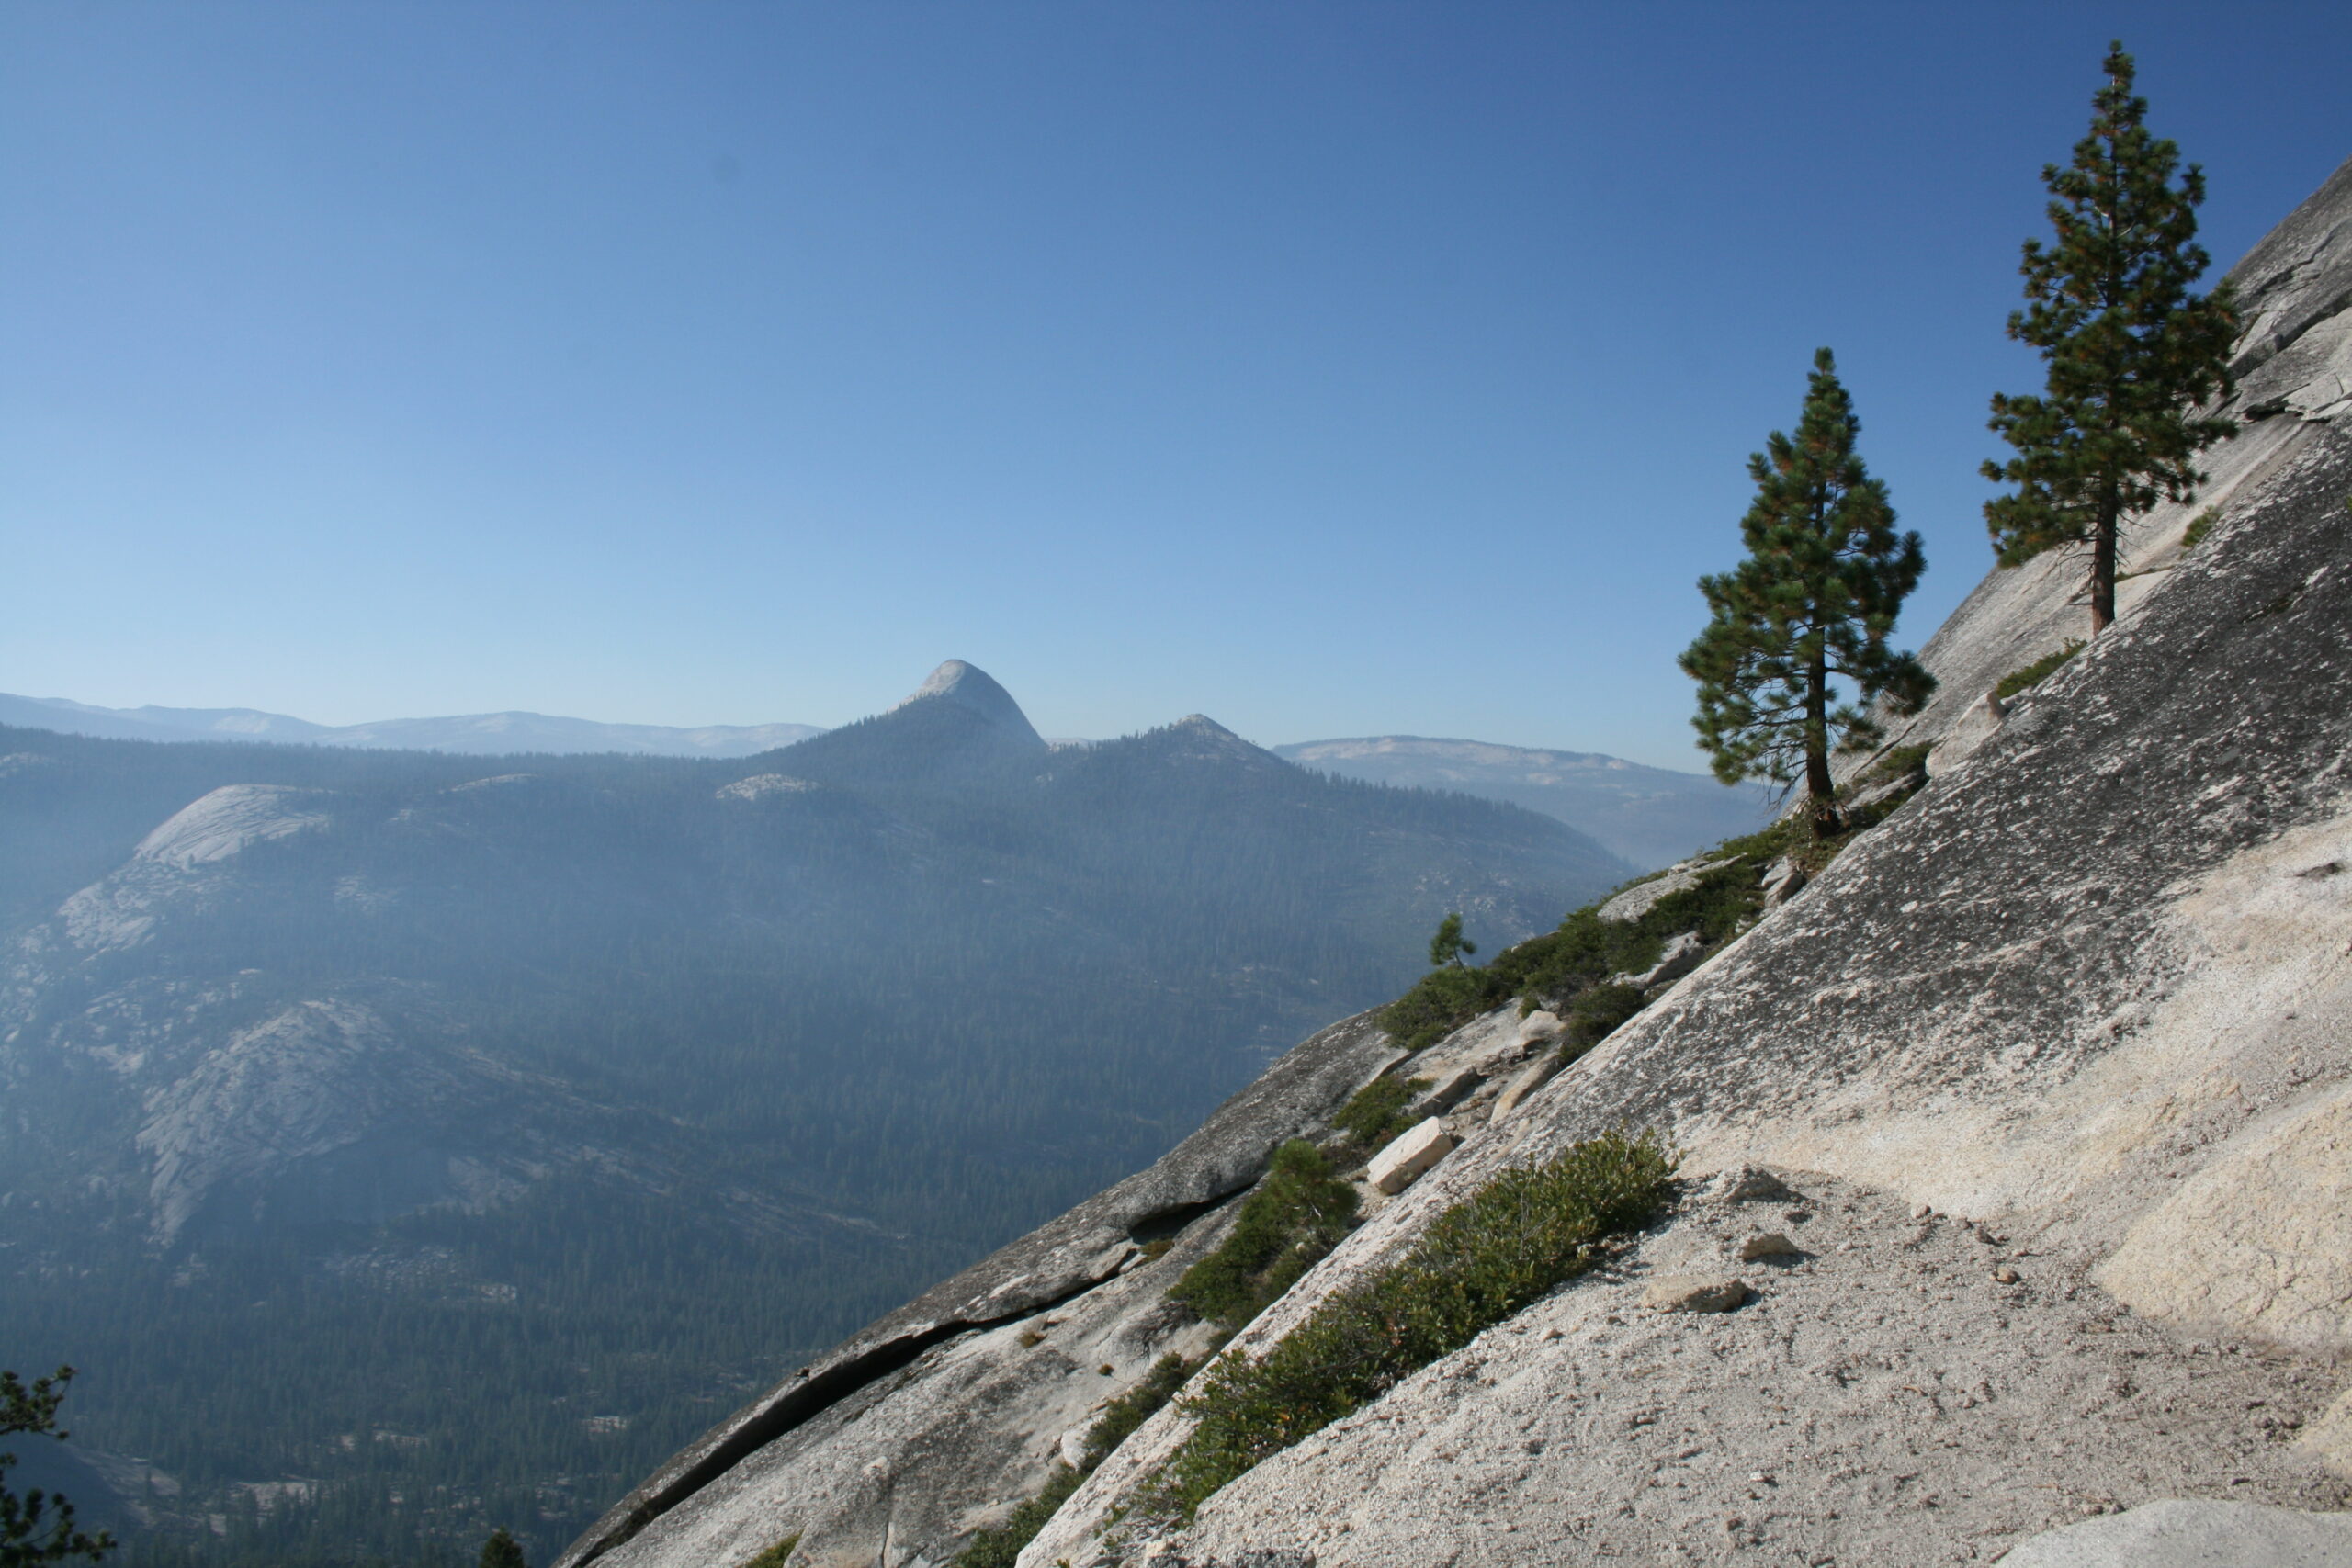 View from Half Dome sub-dome